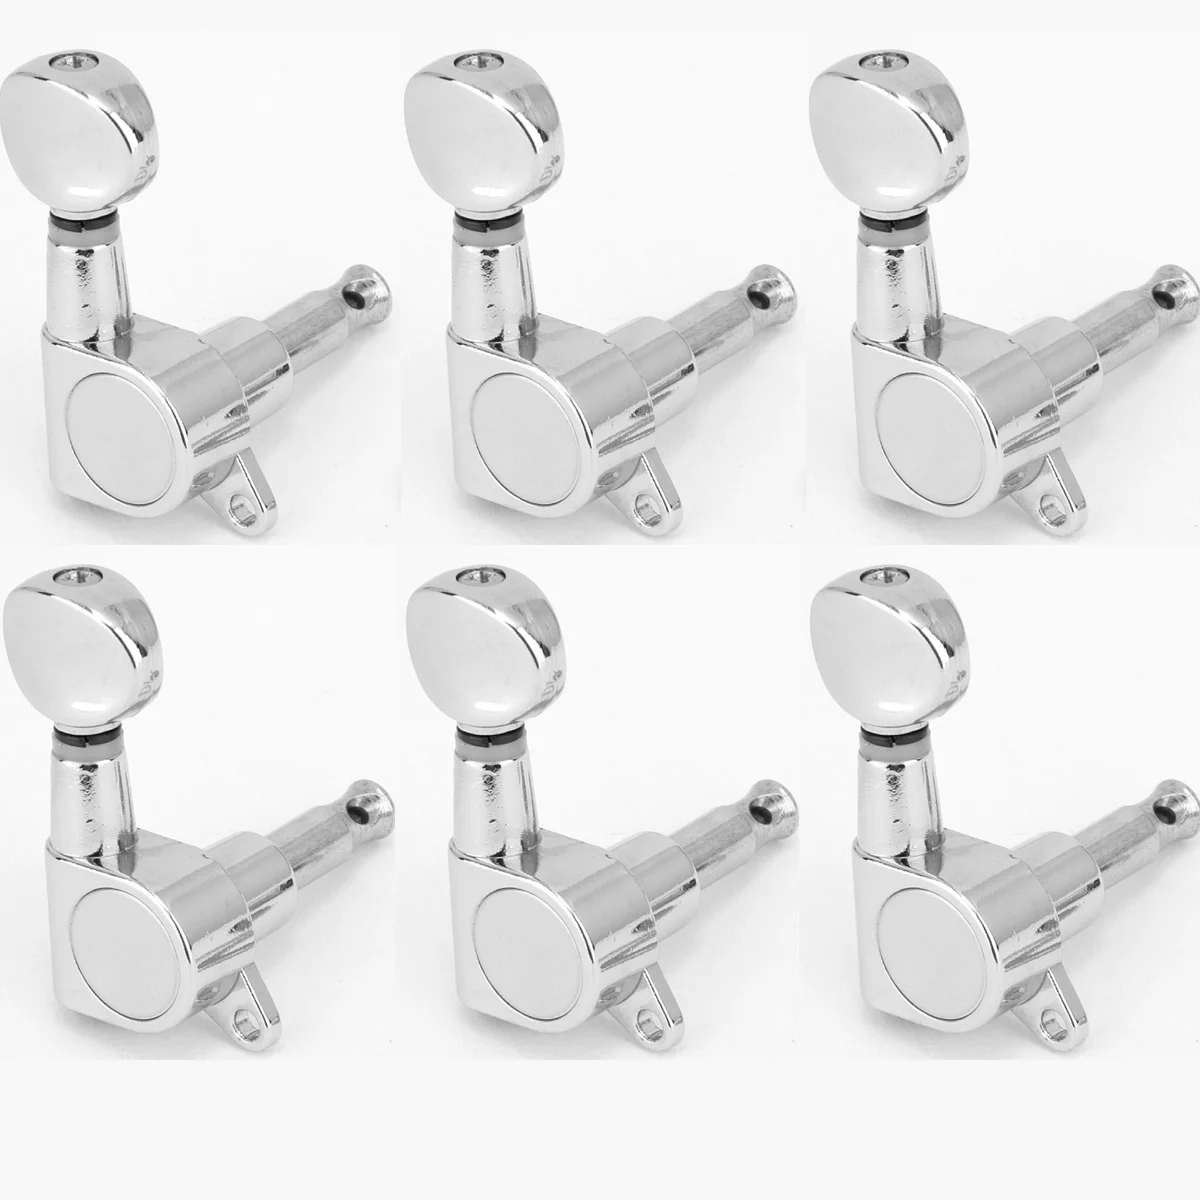 

Musiclily 6-in-line Guitar Sealed Tuners Tuning Pegs Keys Machine Heads Set, Kidney Button Chrome